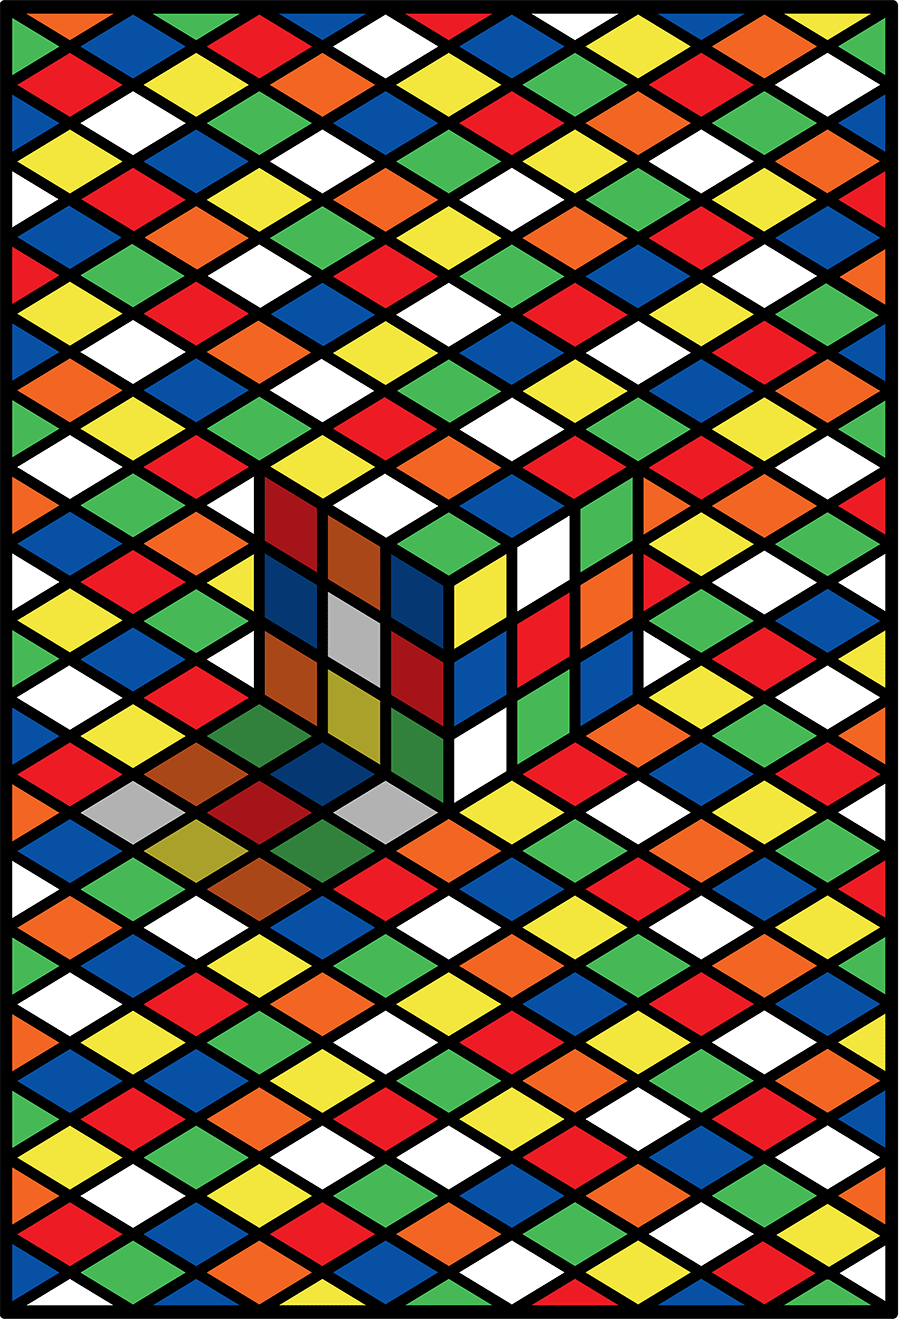 Rubik S Cube By Malika Favre From The Book Of Everyone A Great